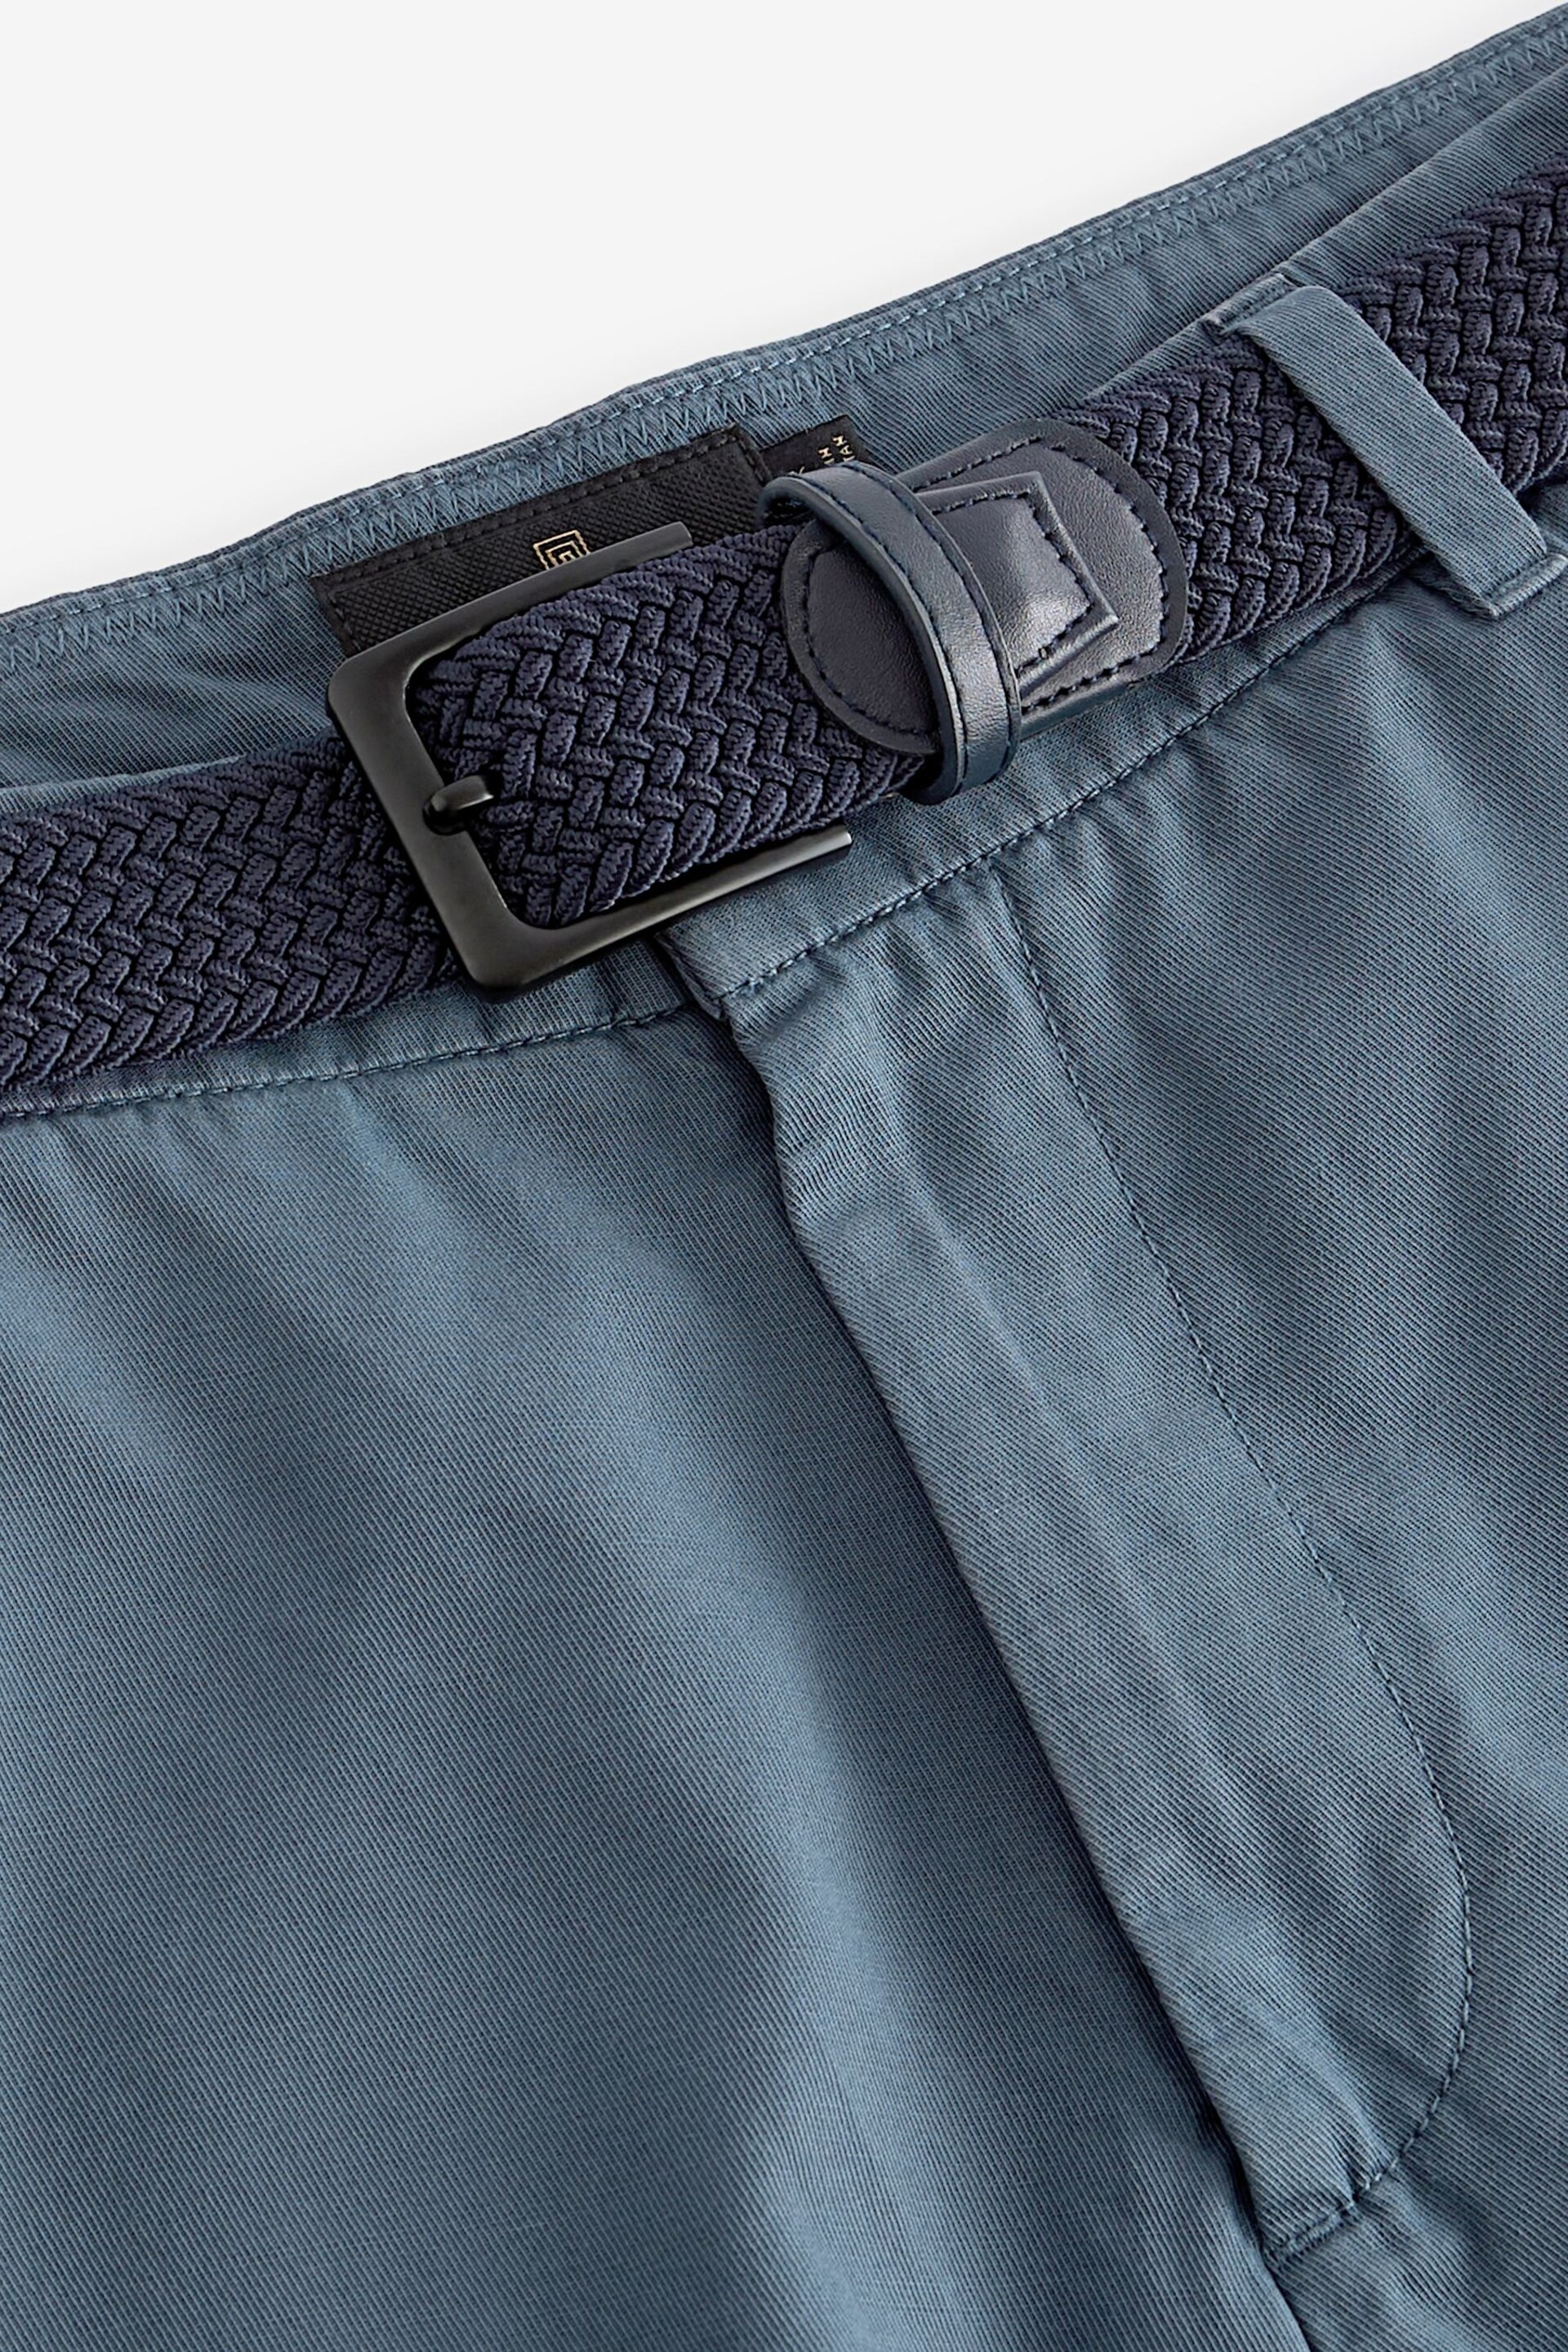 Blue Belted Linen Blend Trousers - Image 10 of 12